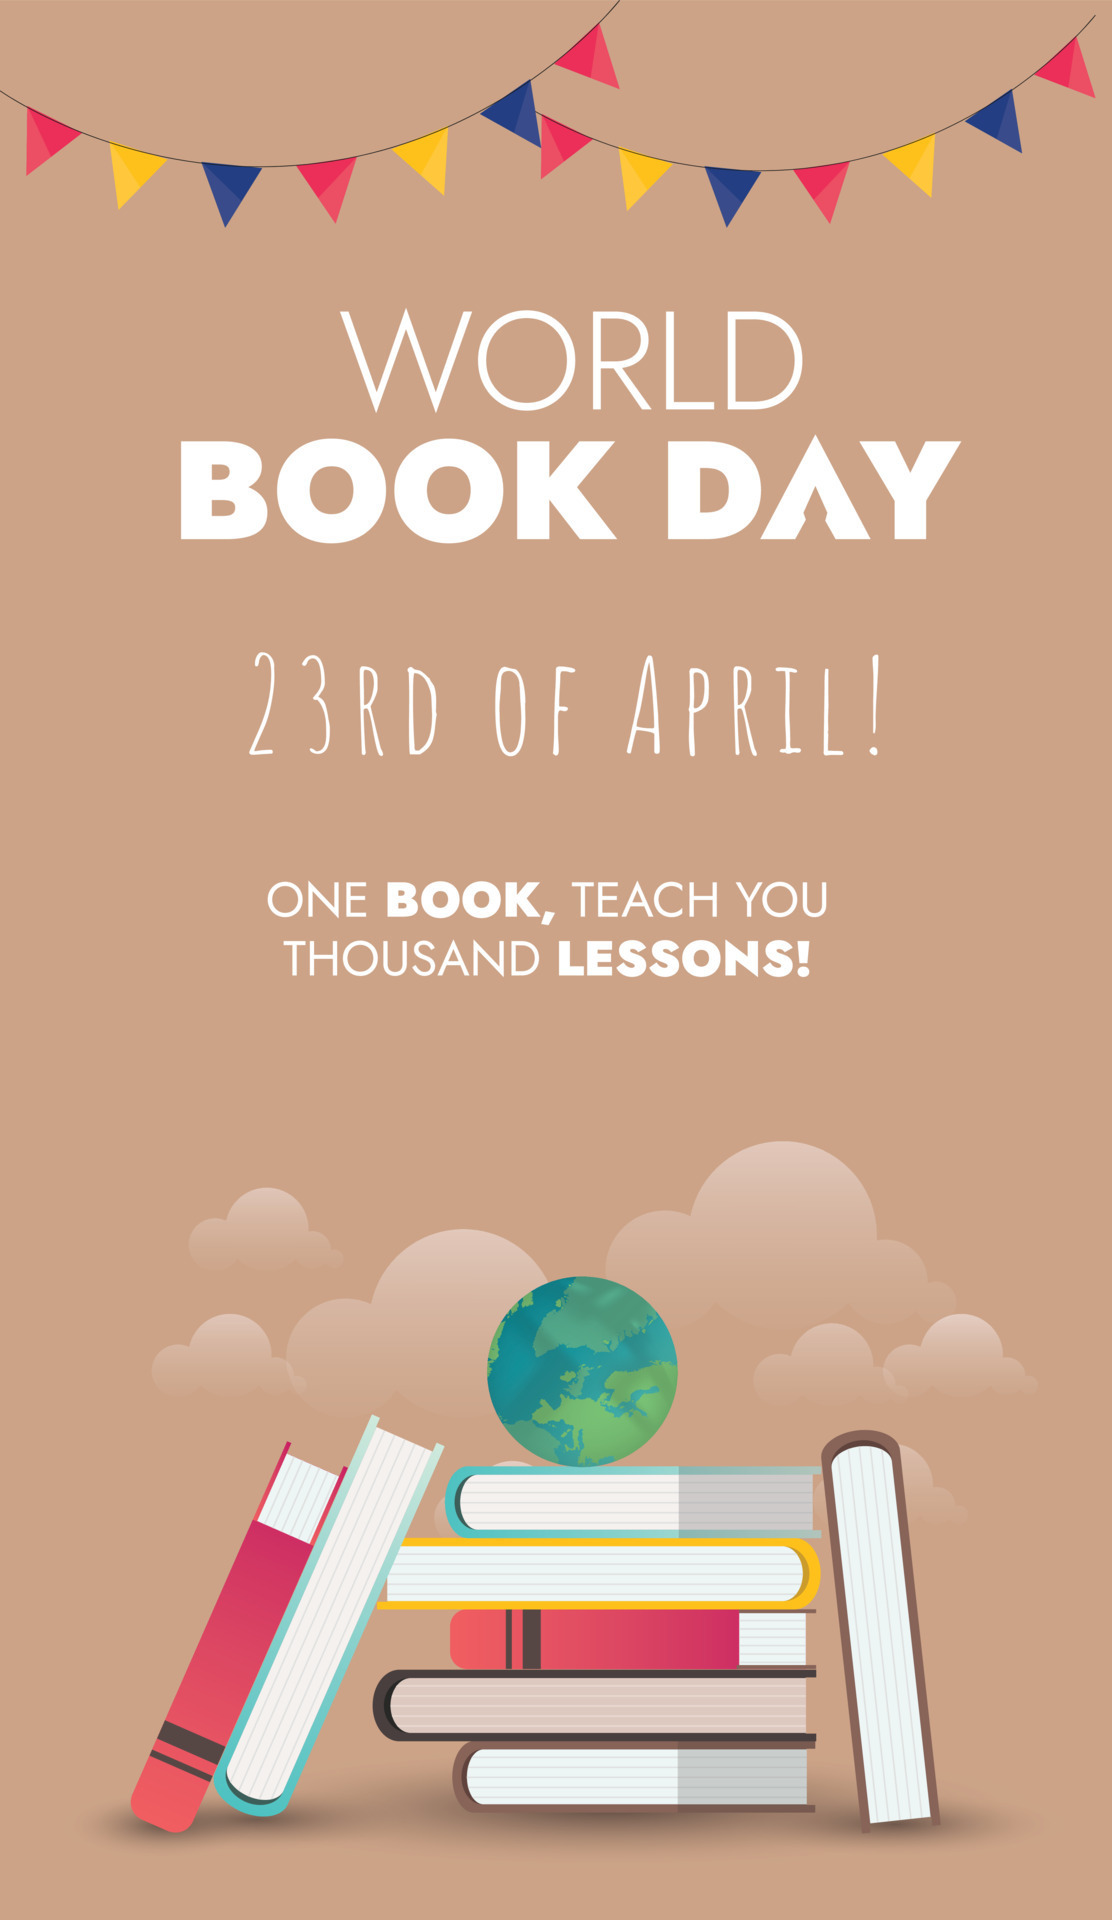 World book day. Happy World book day 2023 celebration poster with pile